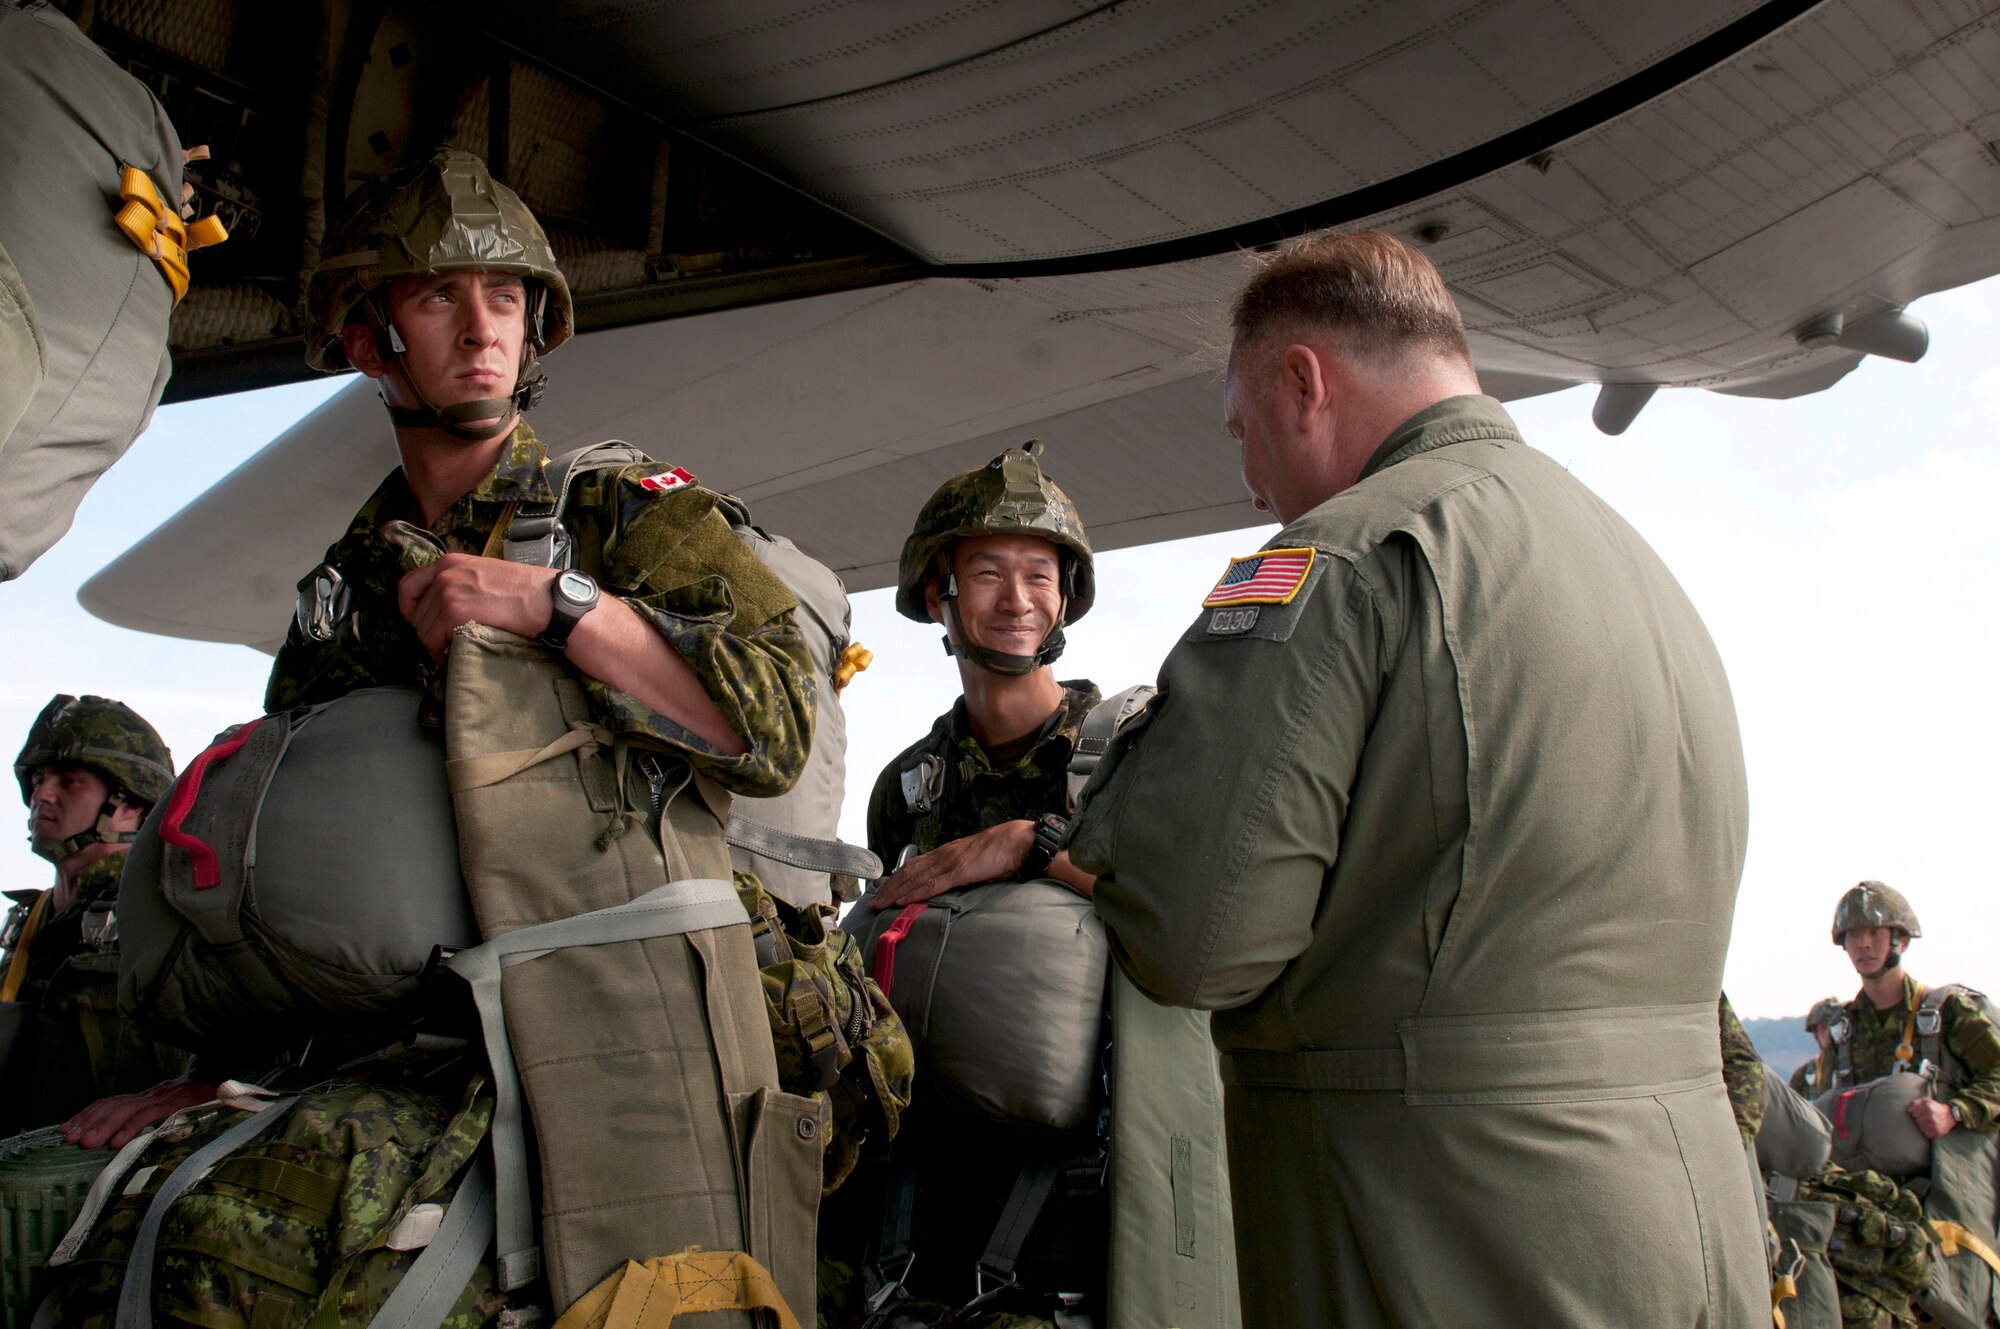 Air Force Master Sgt. Wayne Reeser (right), a loadmaster from the Kentucky Air National Guard’s 123rd Airlift Wing, talks with a paratrooper from the Royal Canadian Regiment at Ramstein Air Base, Germany, just before a Kentucky C-130 Hercules aircraft transports the paratrooper and other NATO forces into the Baltic region Sept. 5, 2014, as part of Operation Sabre Junction. The Kentucky Air National Guard is participating in the operation along with five other Air National Guard Units and forces from 17 NATO countries. (U.S. Air National Guard photo by 2nd Lt. James W. Killen/Released)